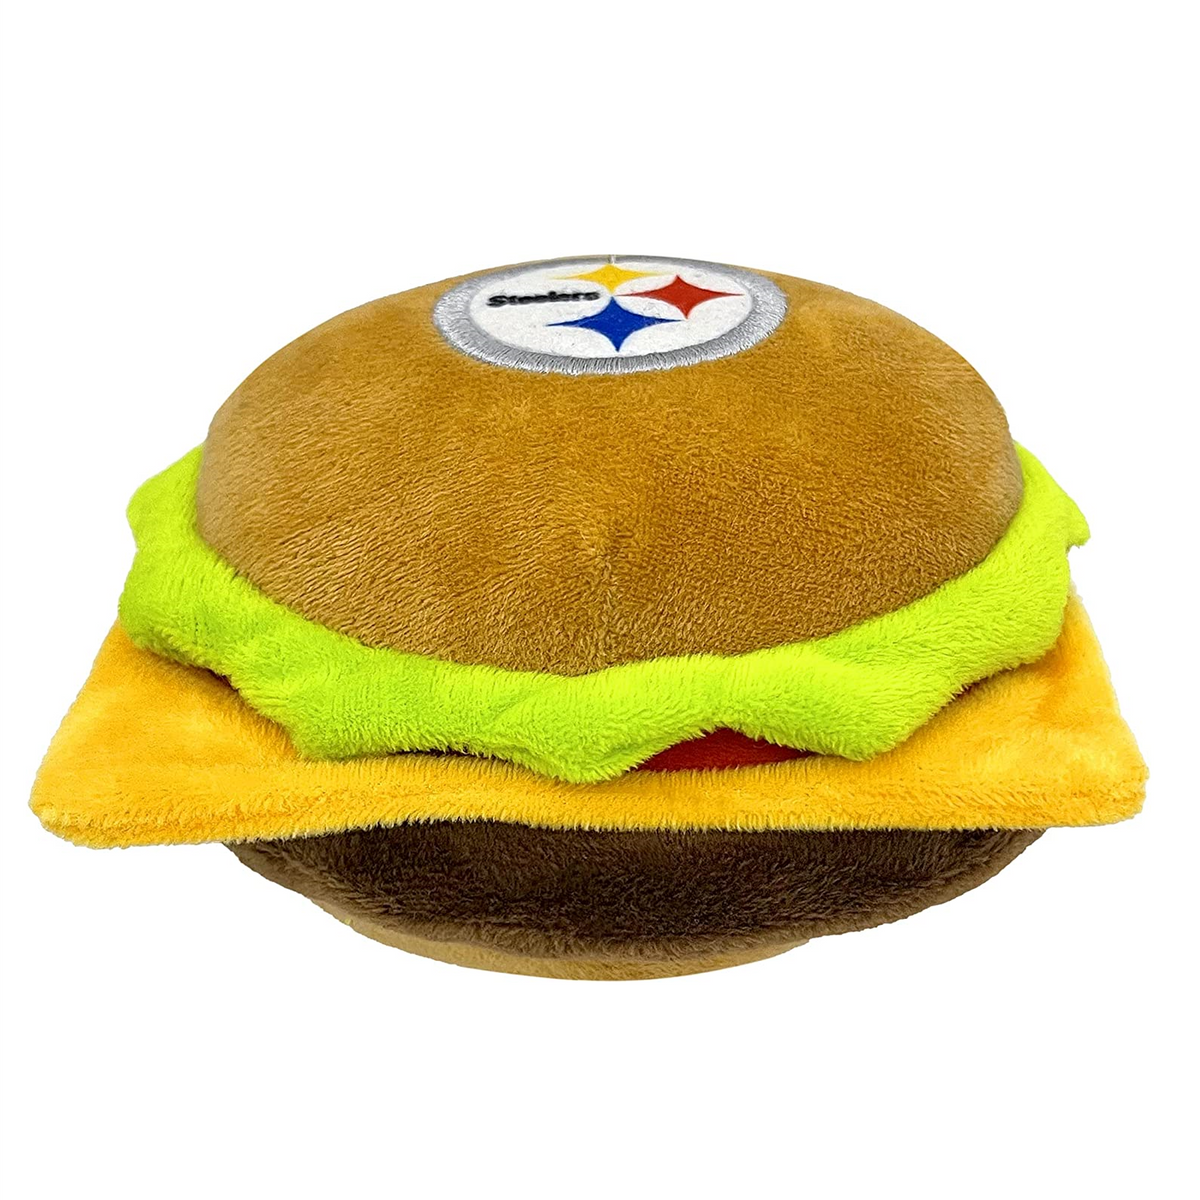 Pittsburgh Steelers Hamburger Plush Toys - 3 Red Rovers